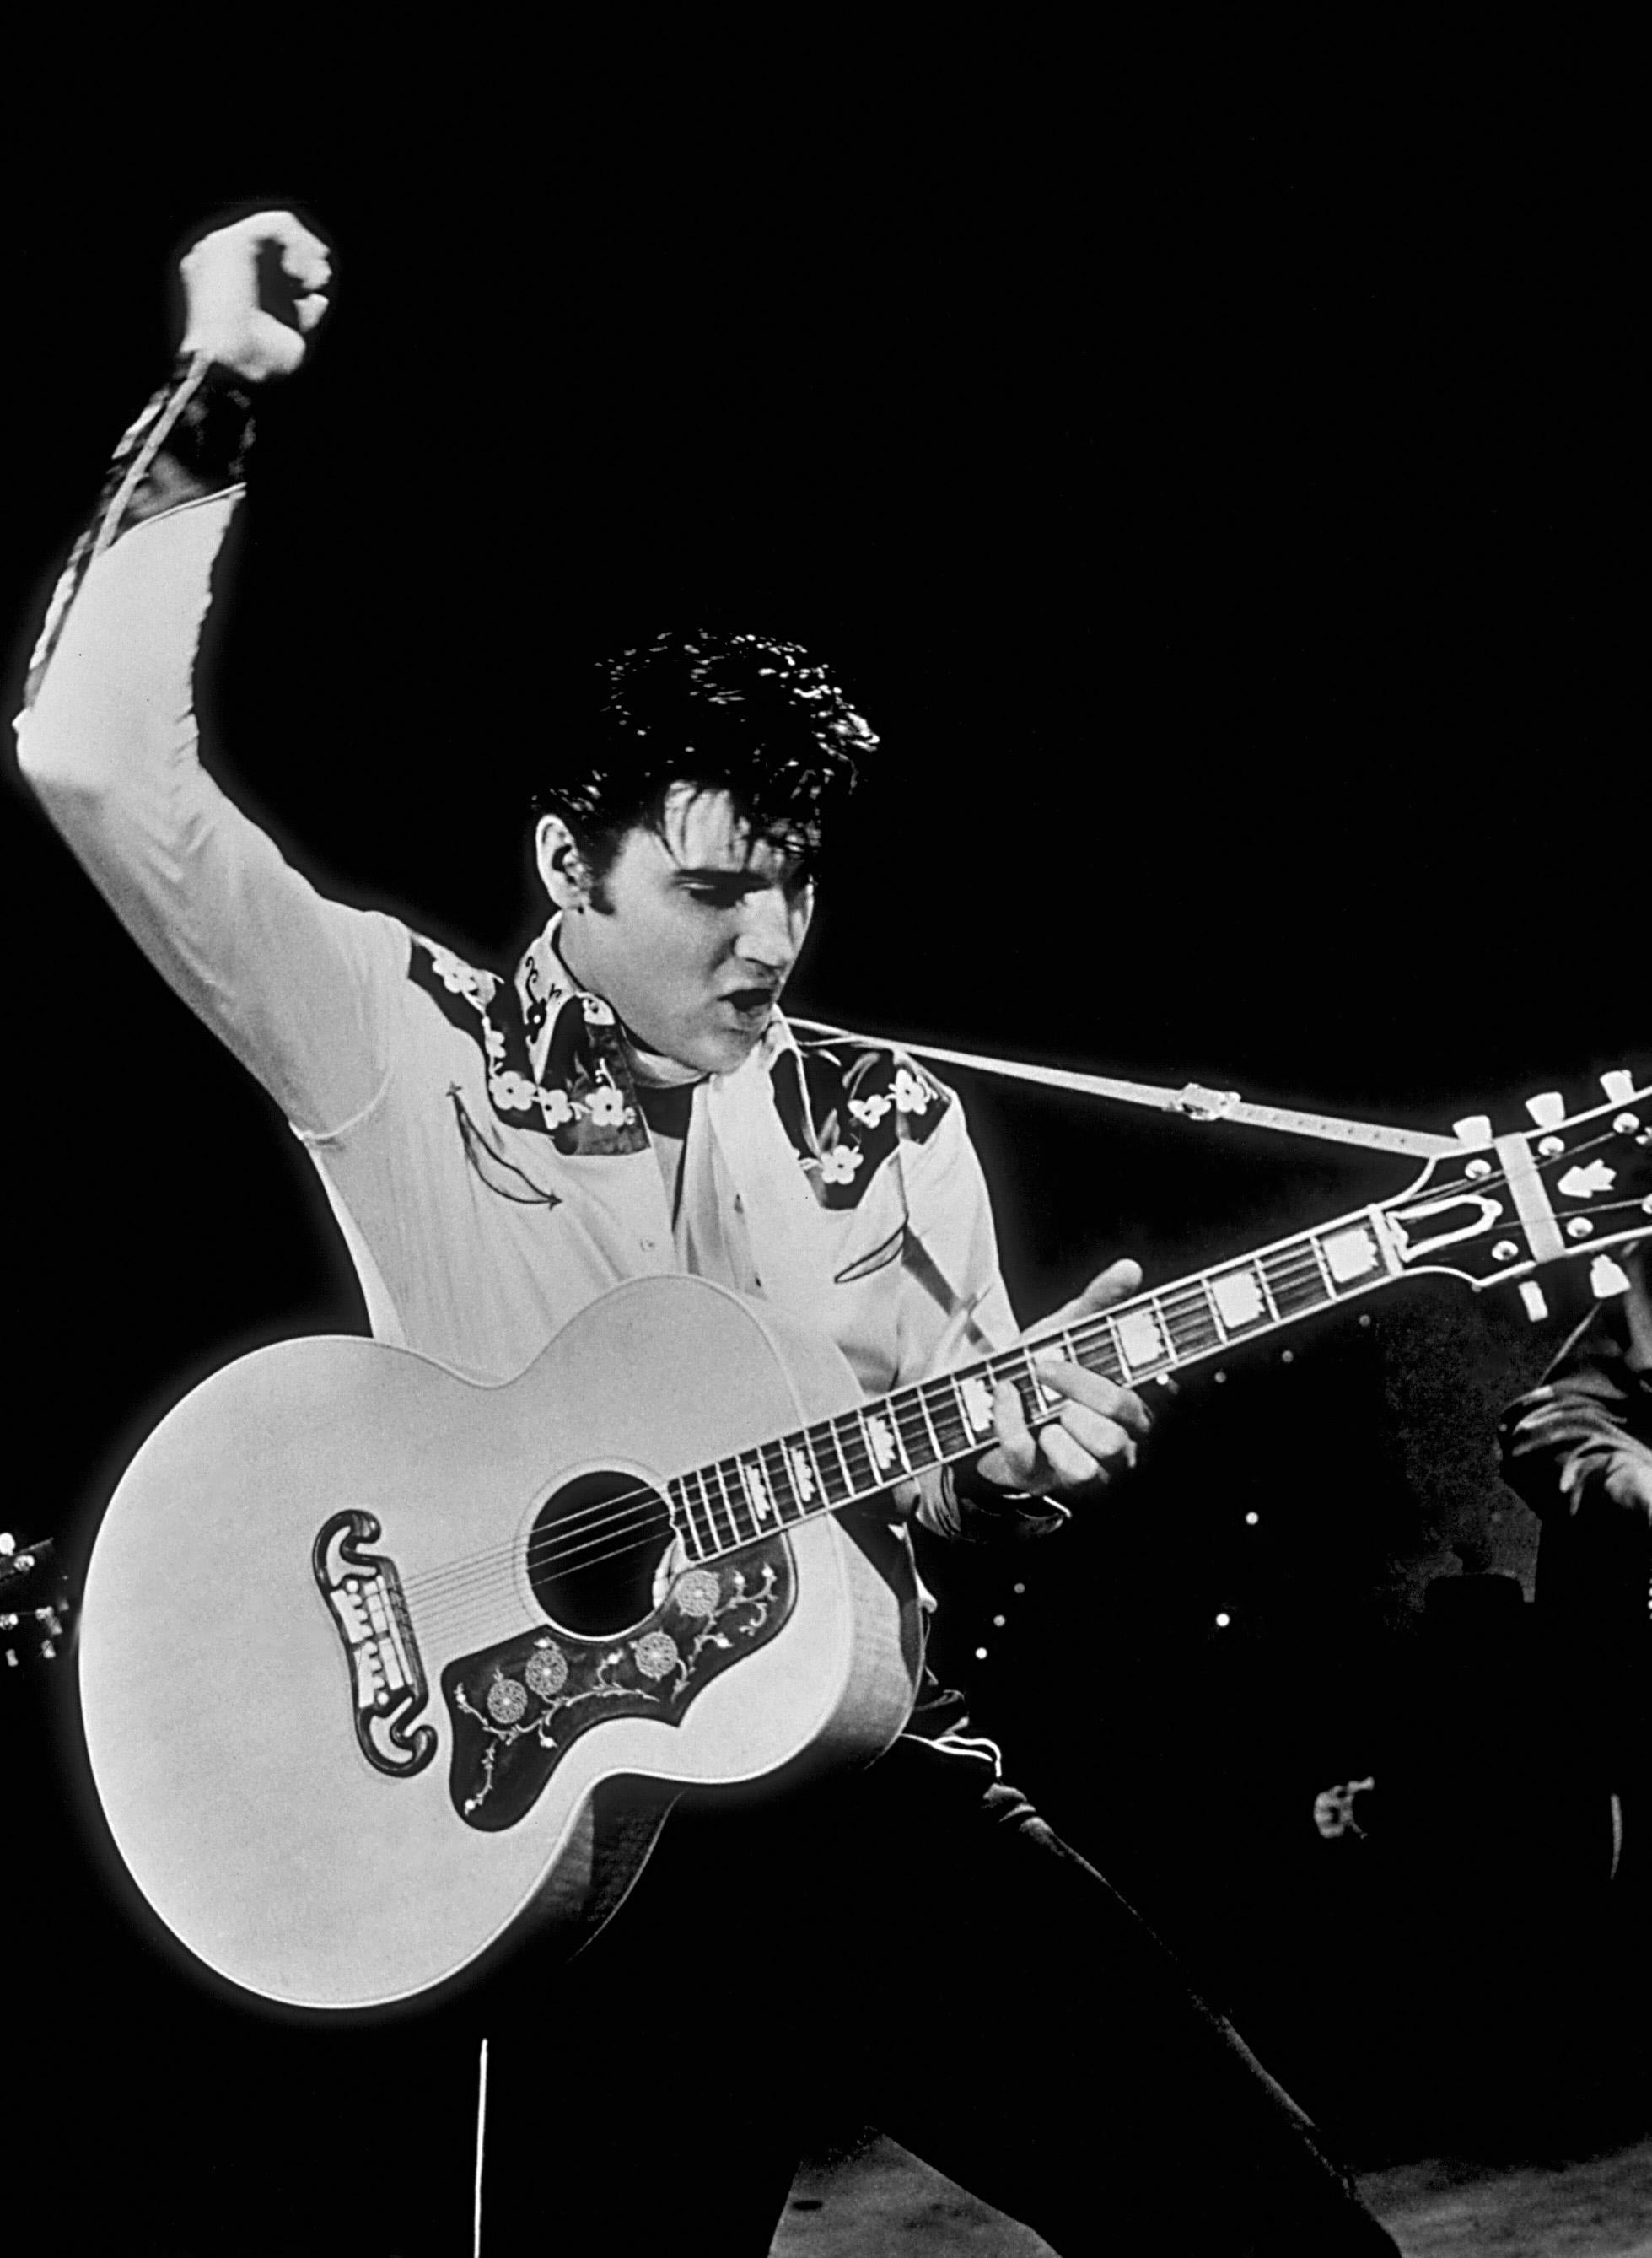 Unknown Black and White Photograph - Elvis Presley Playing Guitar on Stage Globe Photos Fine Art Print